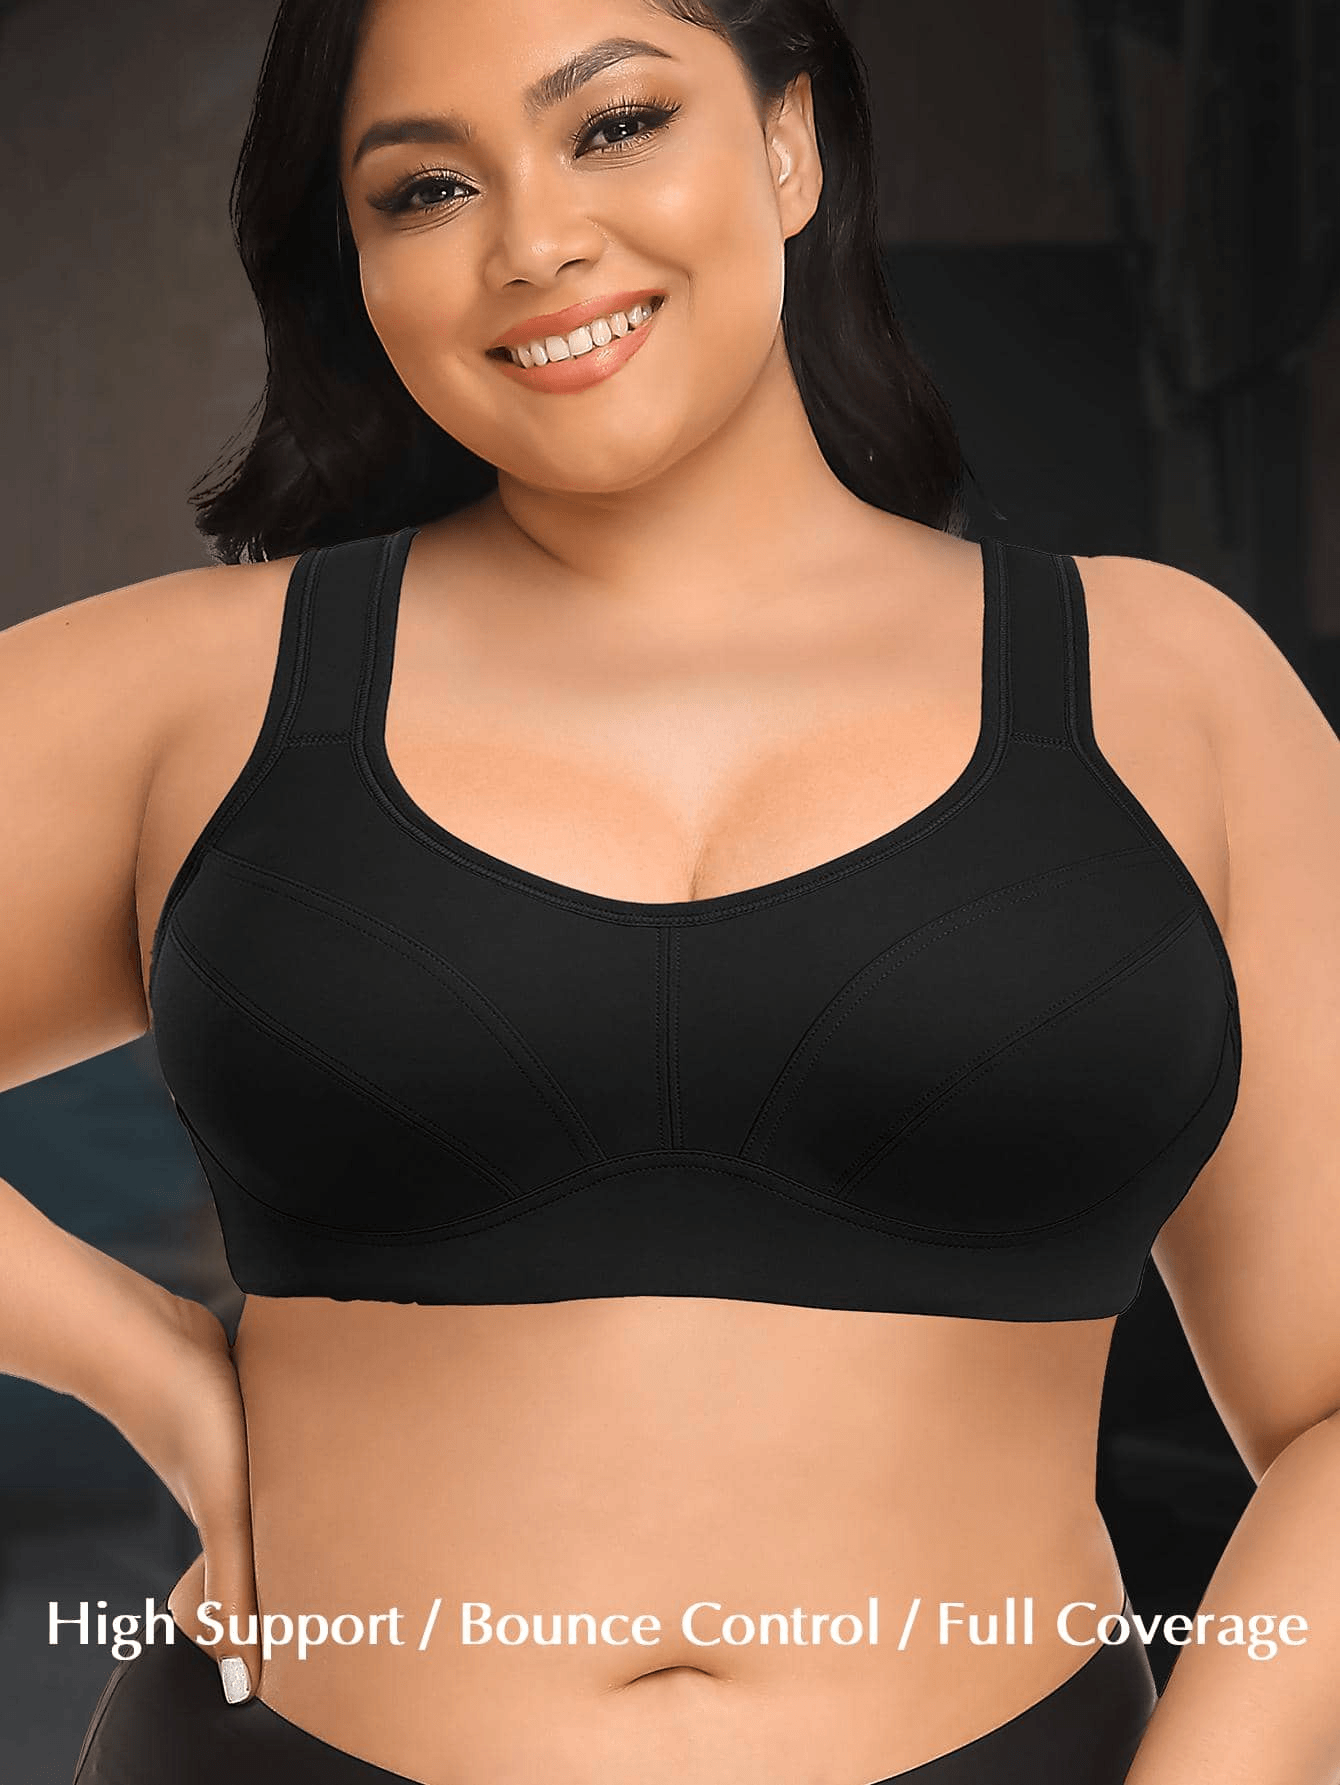  High Impact Sports Bras For Women Underwire High